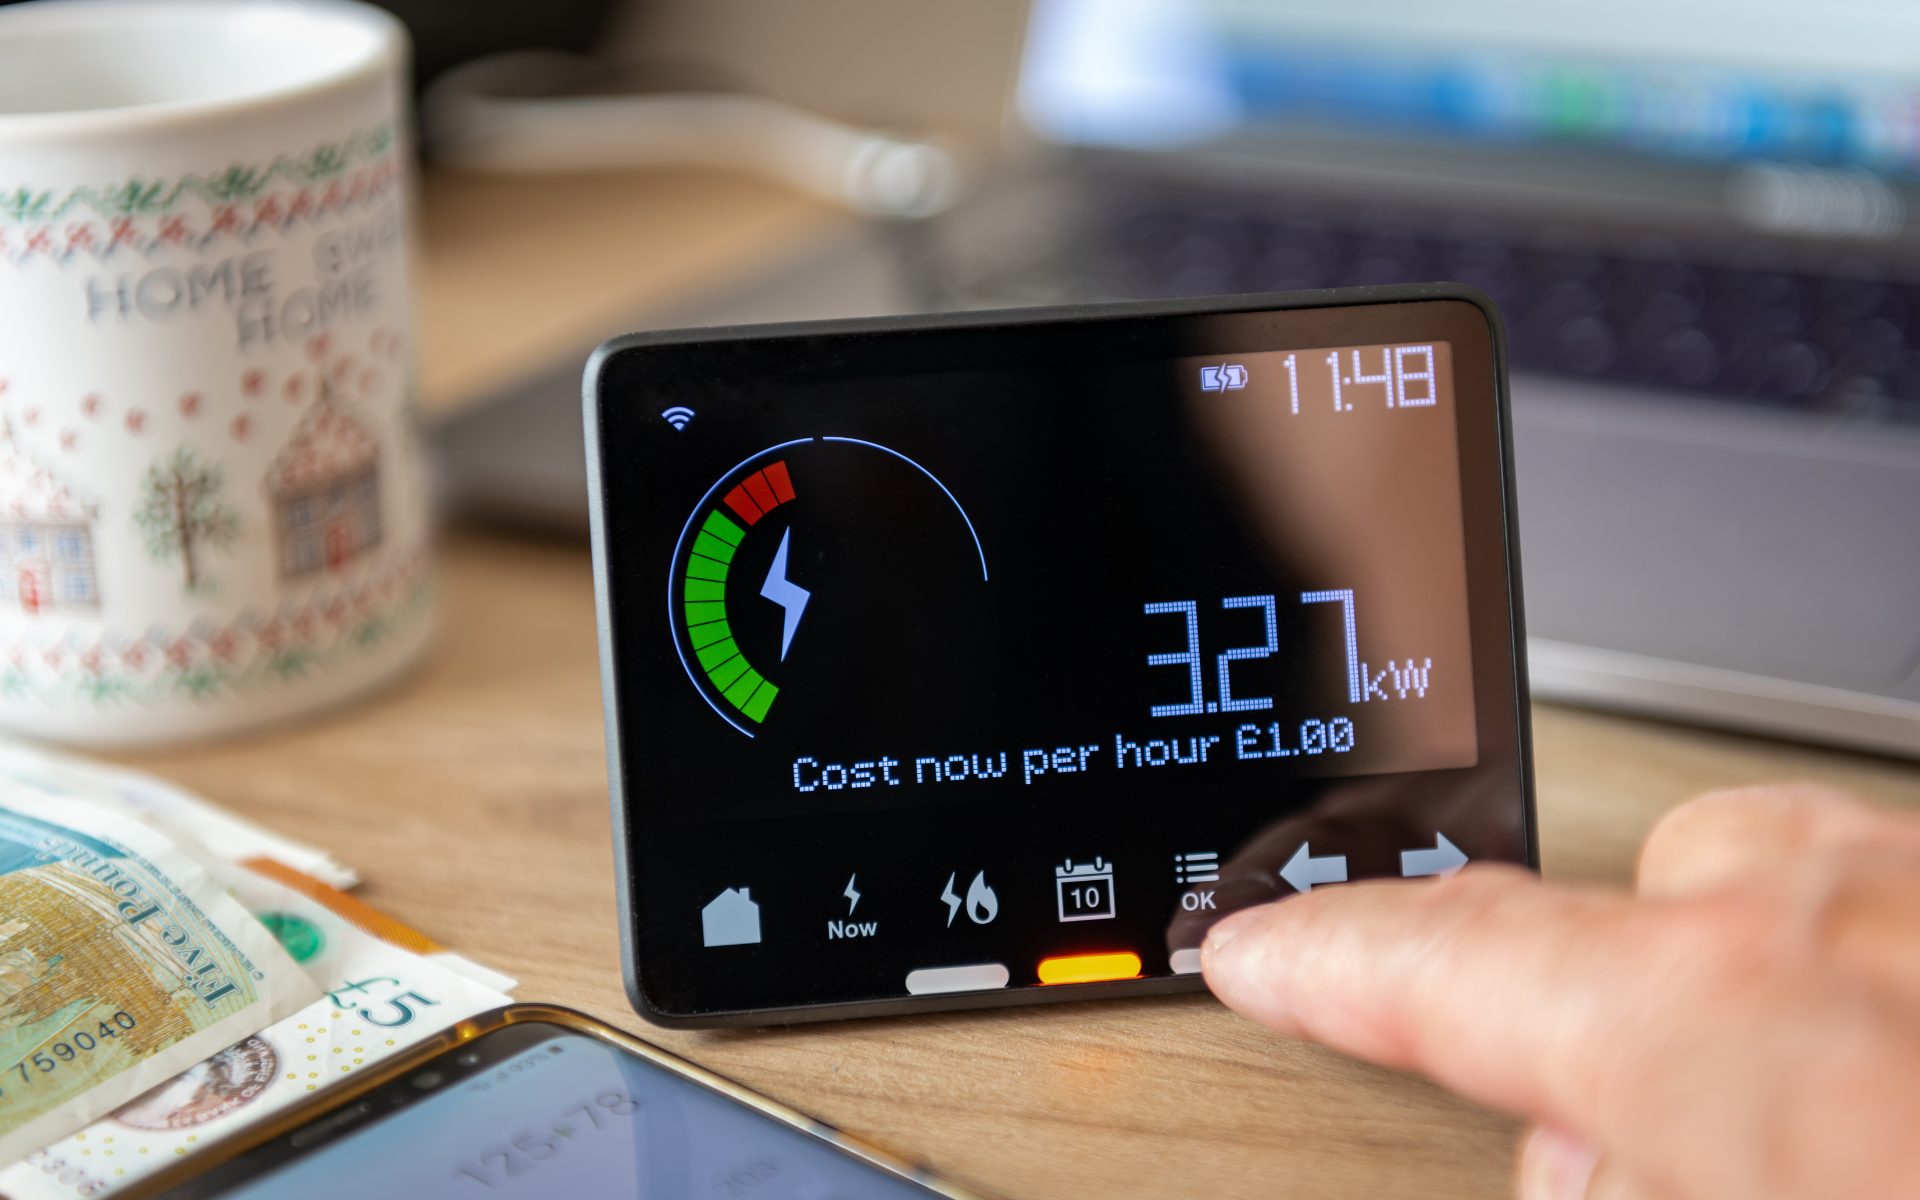 What are the Benefits of Having a Smart Meter?